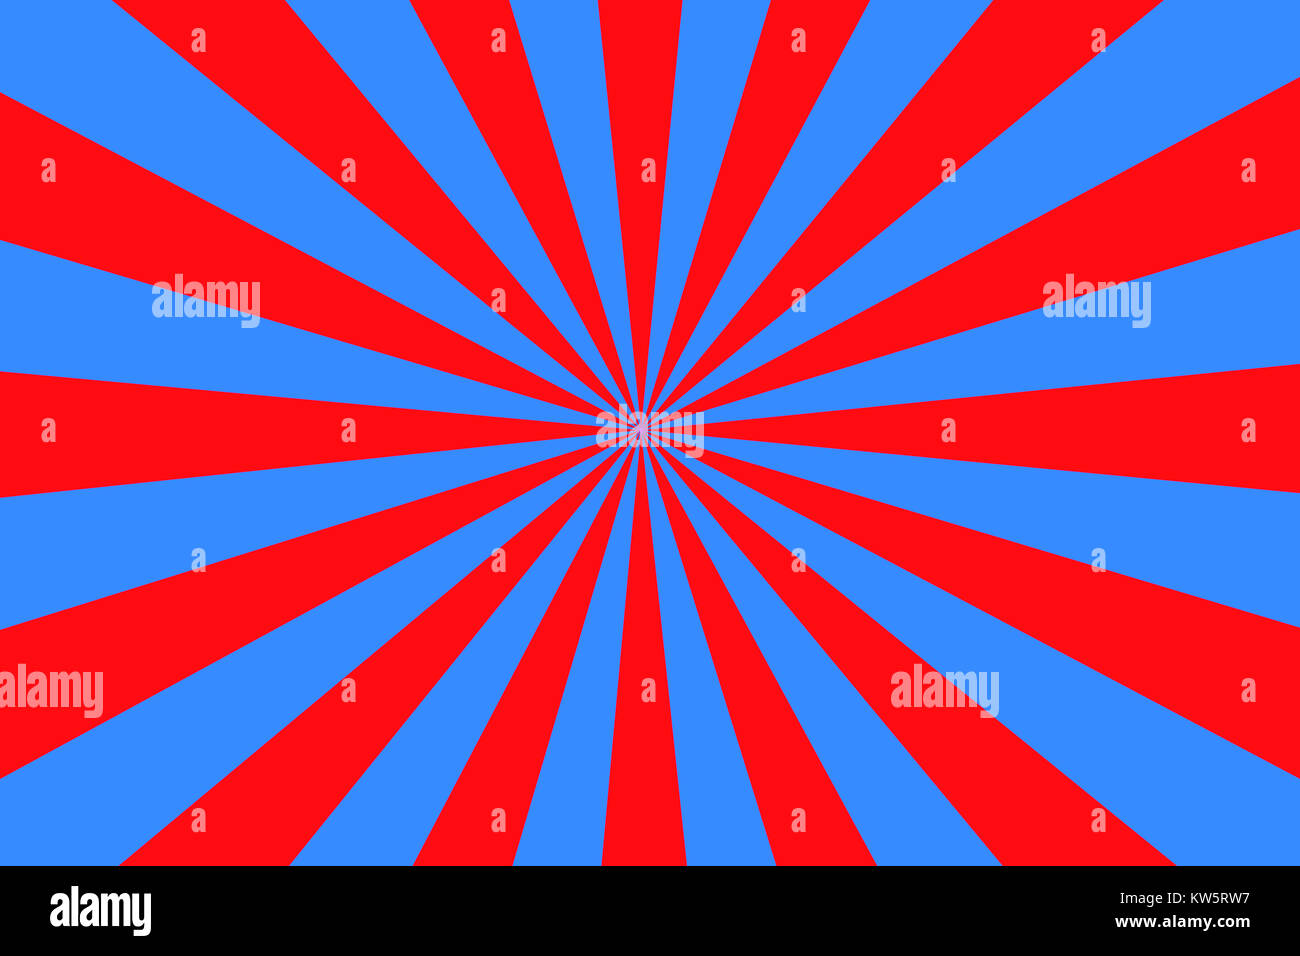 Radiating blue and red line background Stock Photo